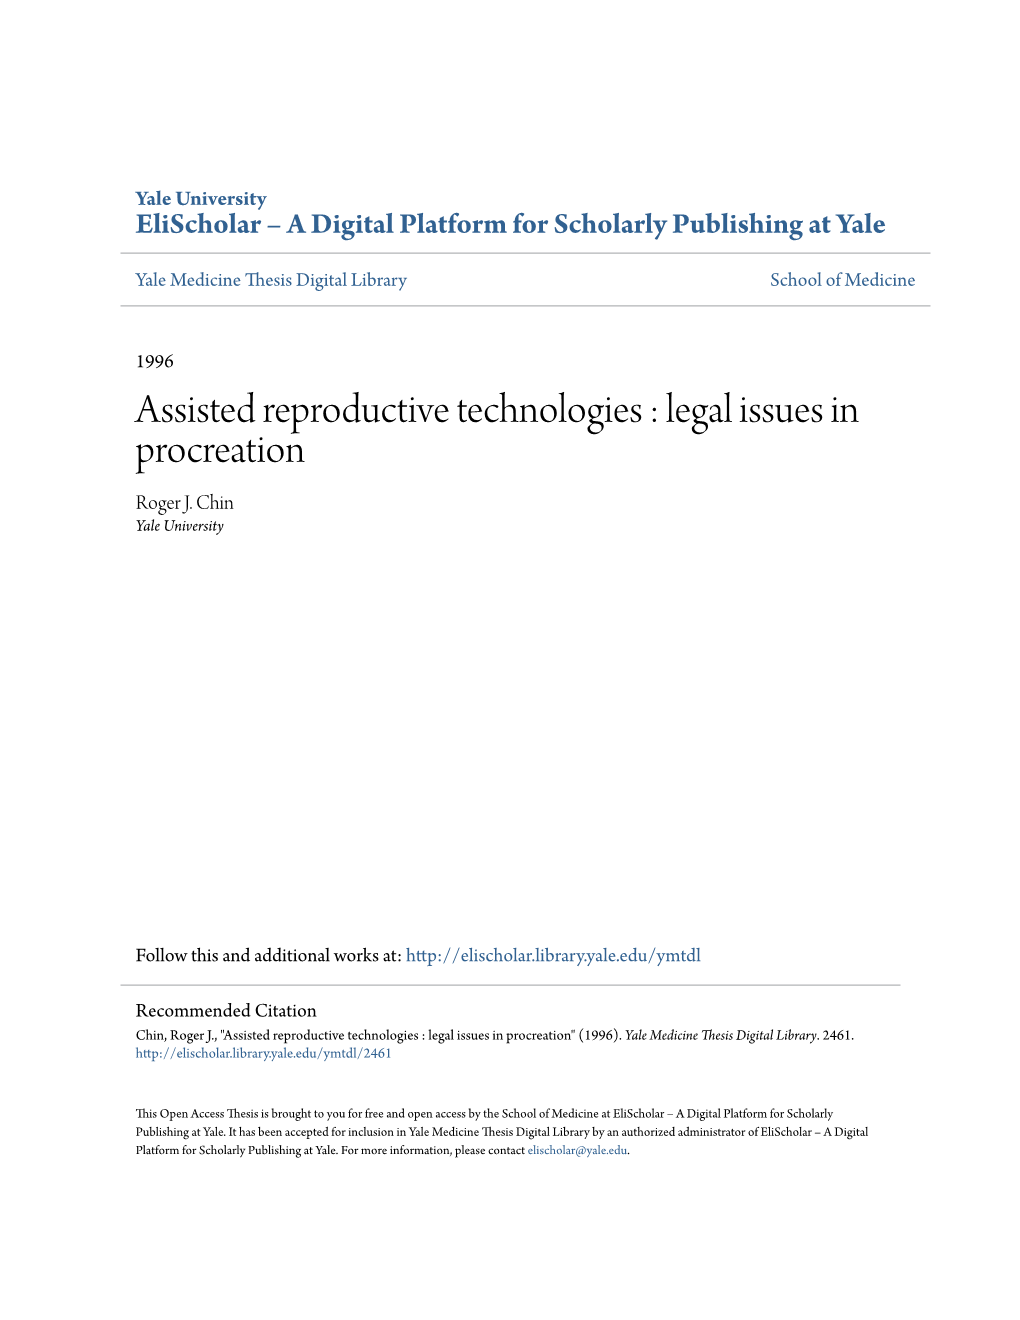 Assisted Reproductive Technologies : Legal Issues in Procreation Roger J